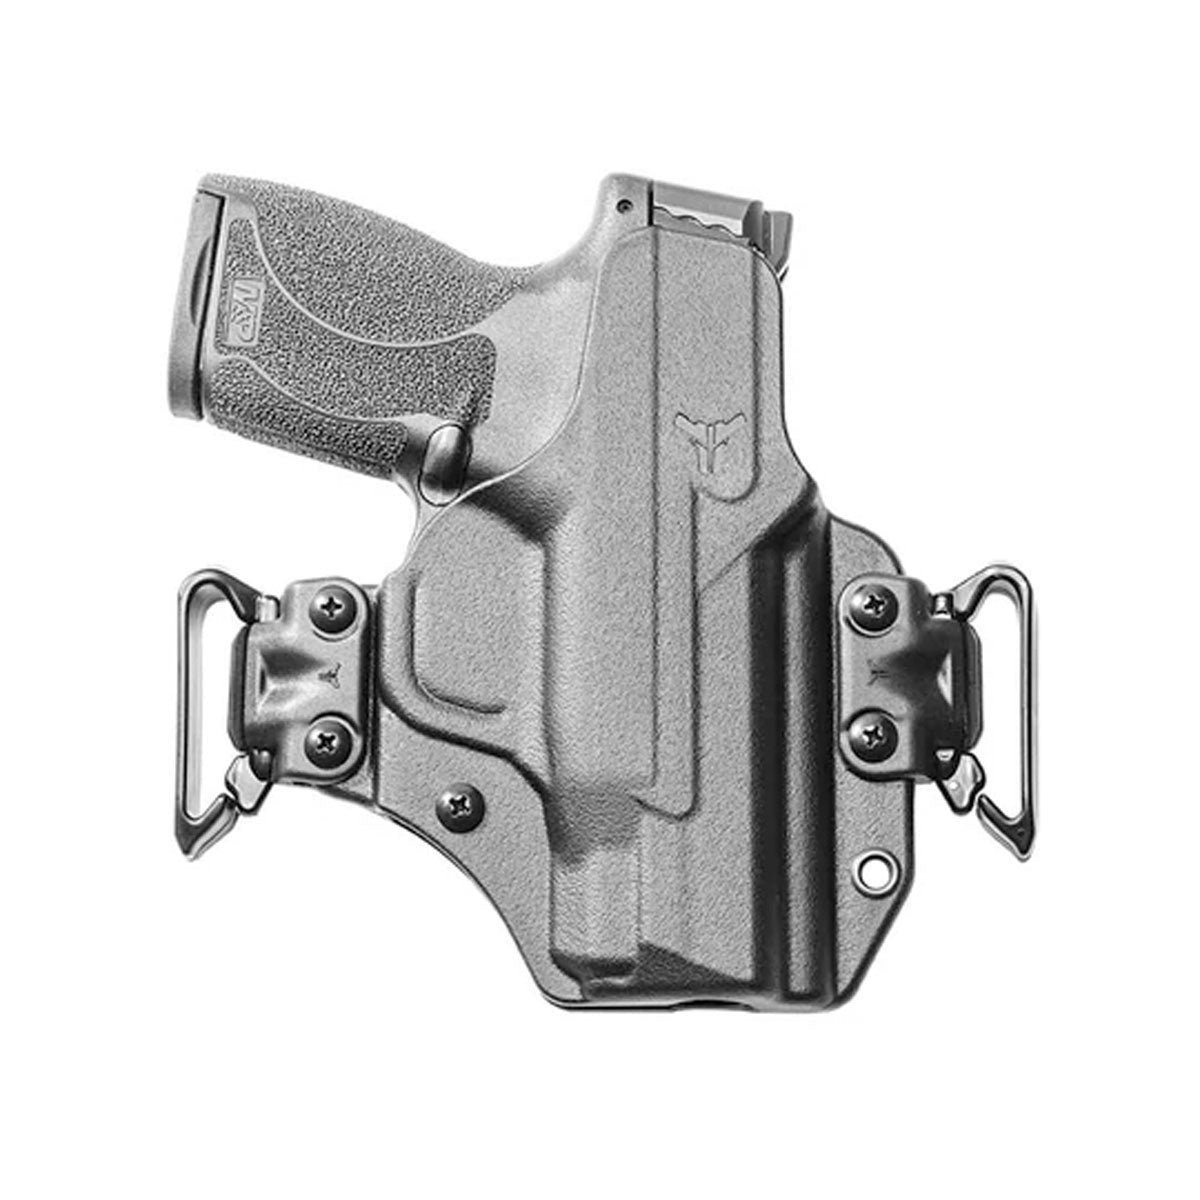 Blade-Tech Total Eclipse 2.0 Modular Holster Holsters Blade-Tech Holsters S&W - M&P 1.0 - 9 / 40 / 45 (4.25") Tactical Gear Supplier Tactical Distributors Australia